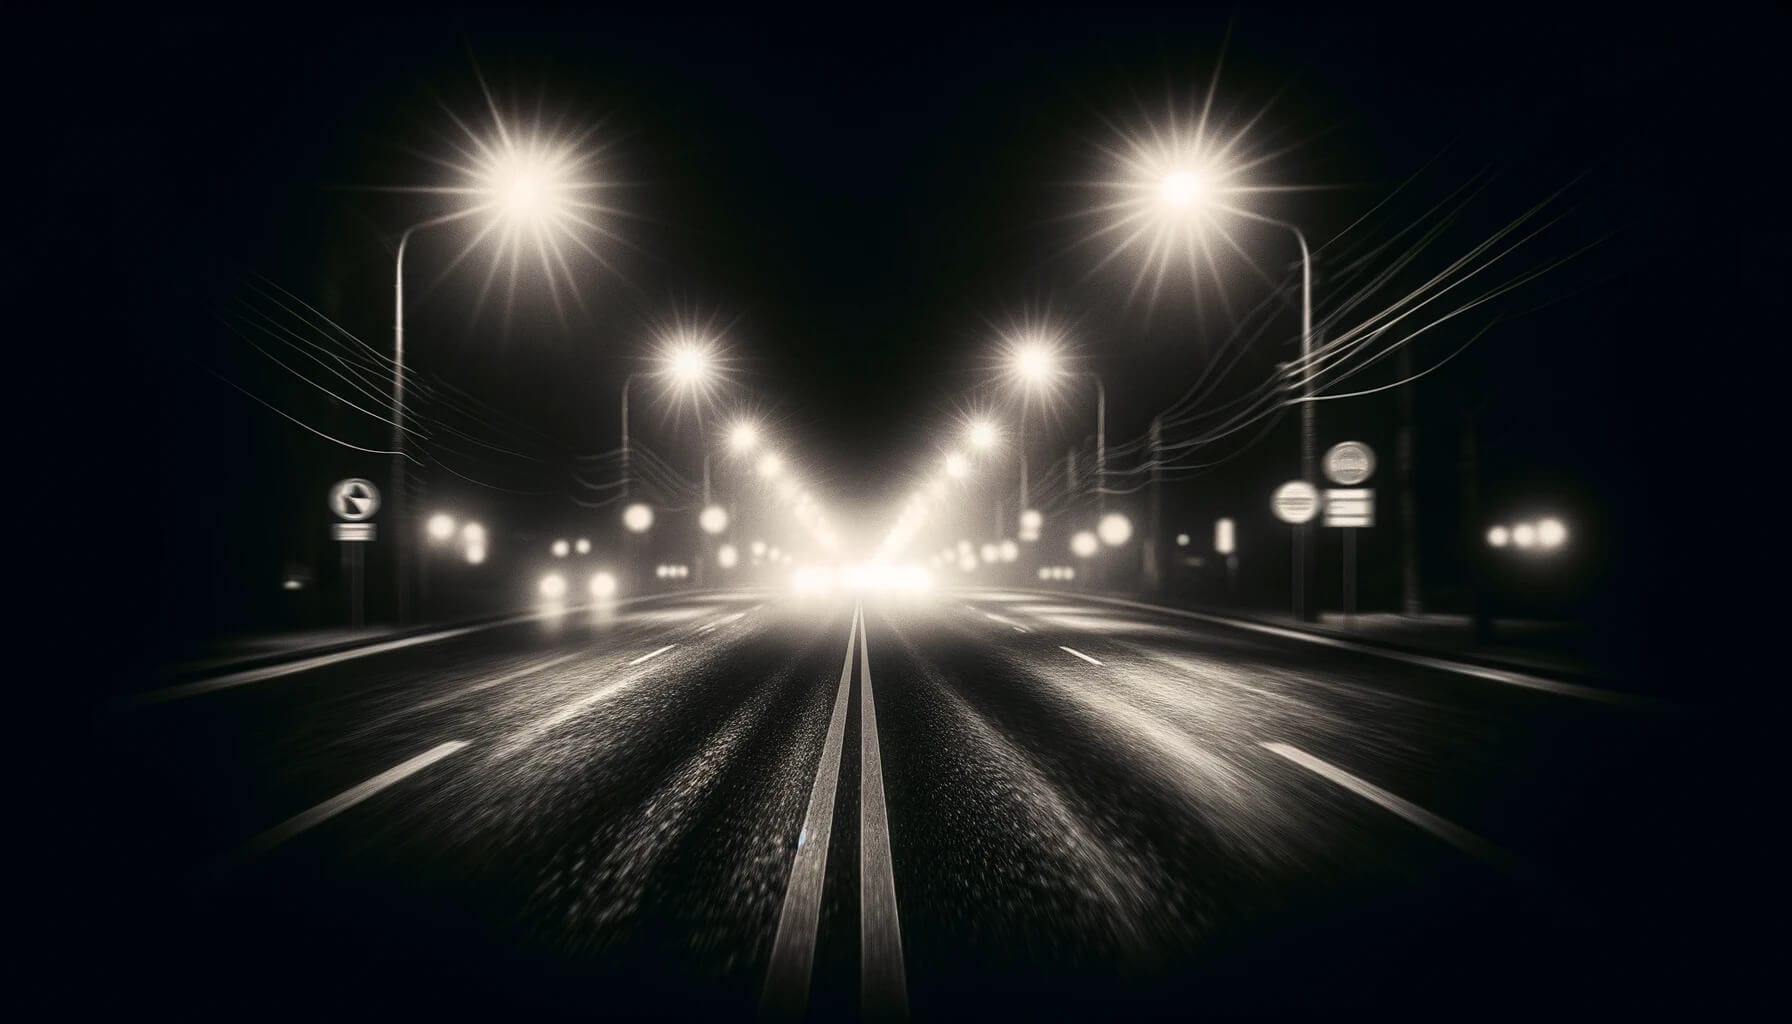 Night Blindness, also known as Nyctalopia Optometrist